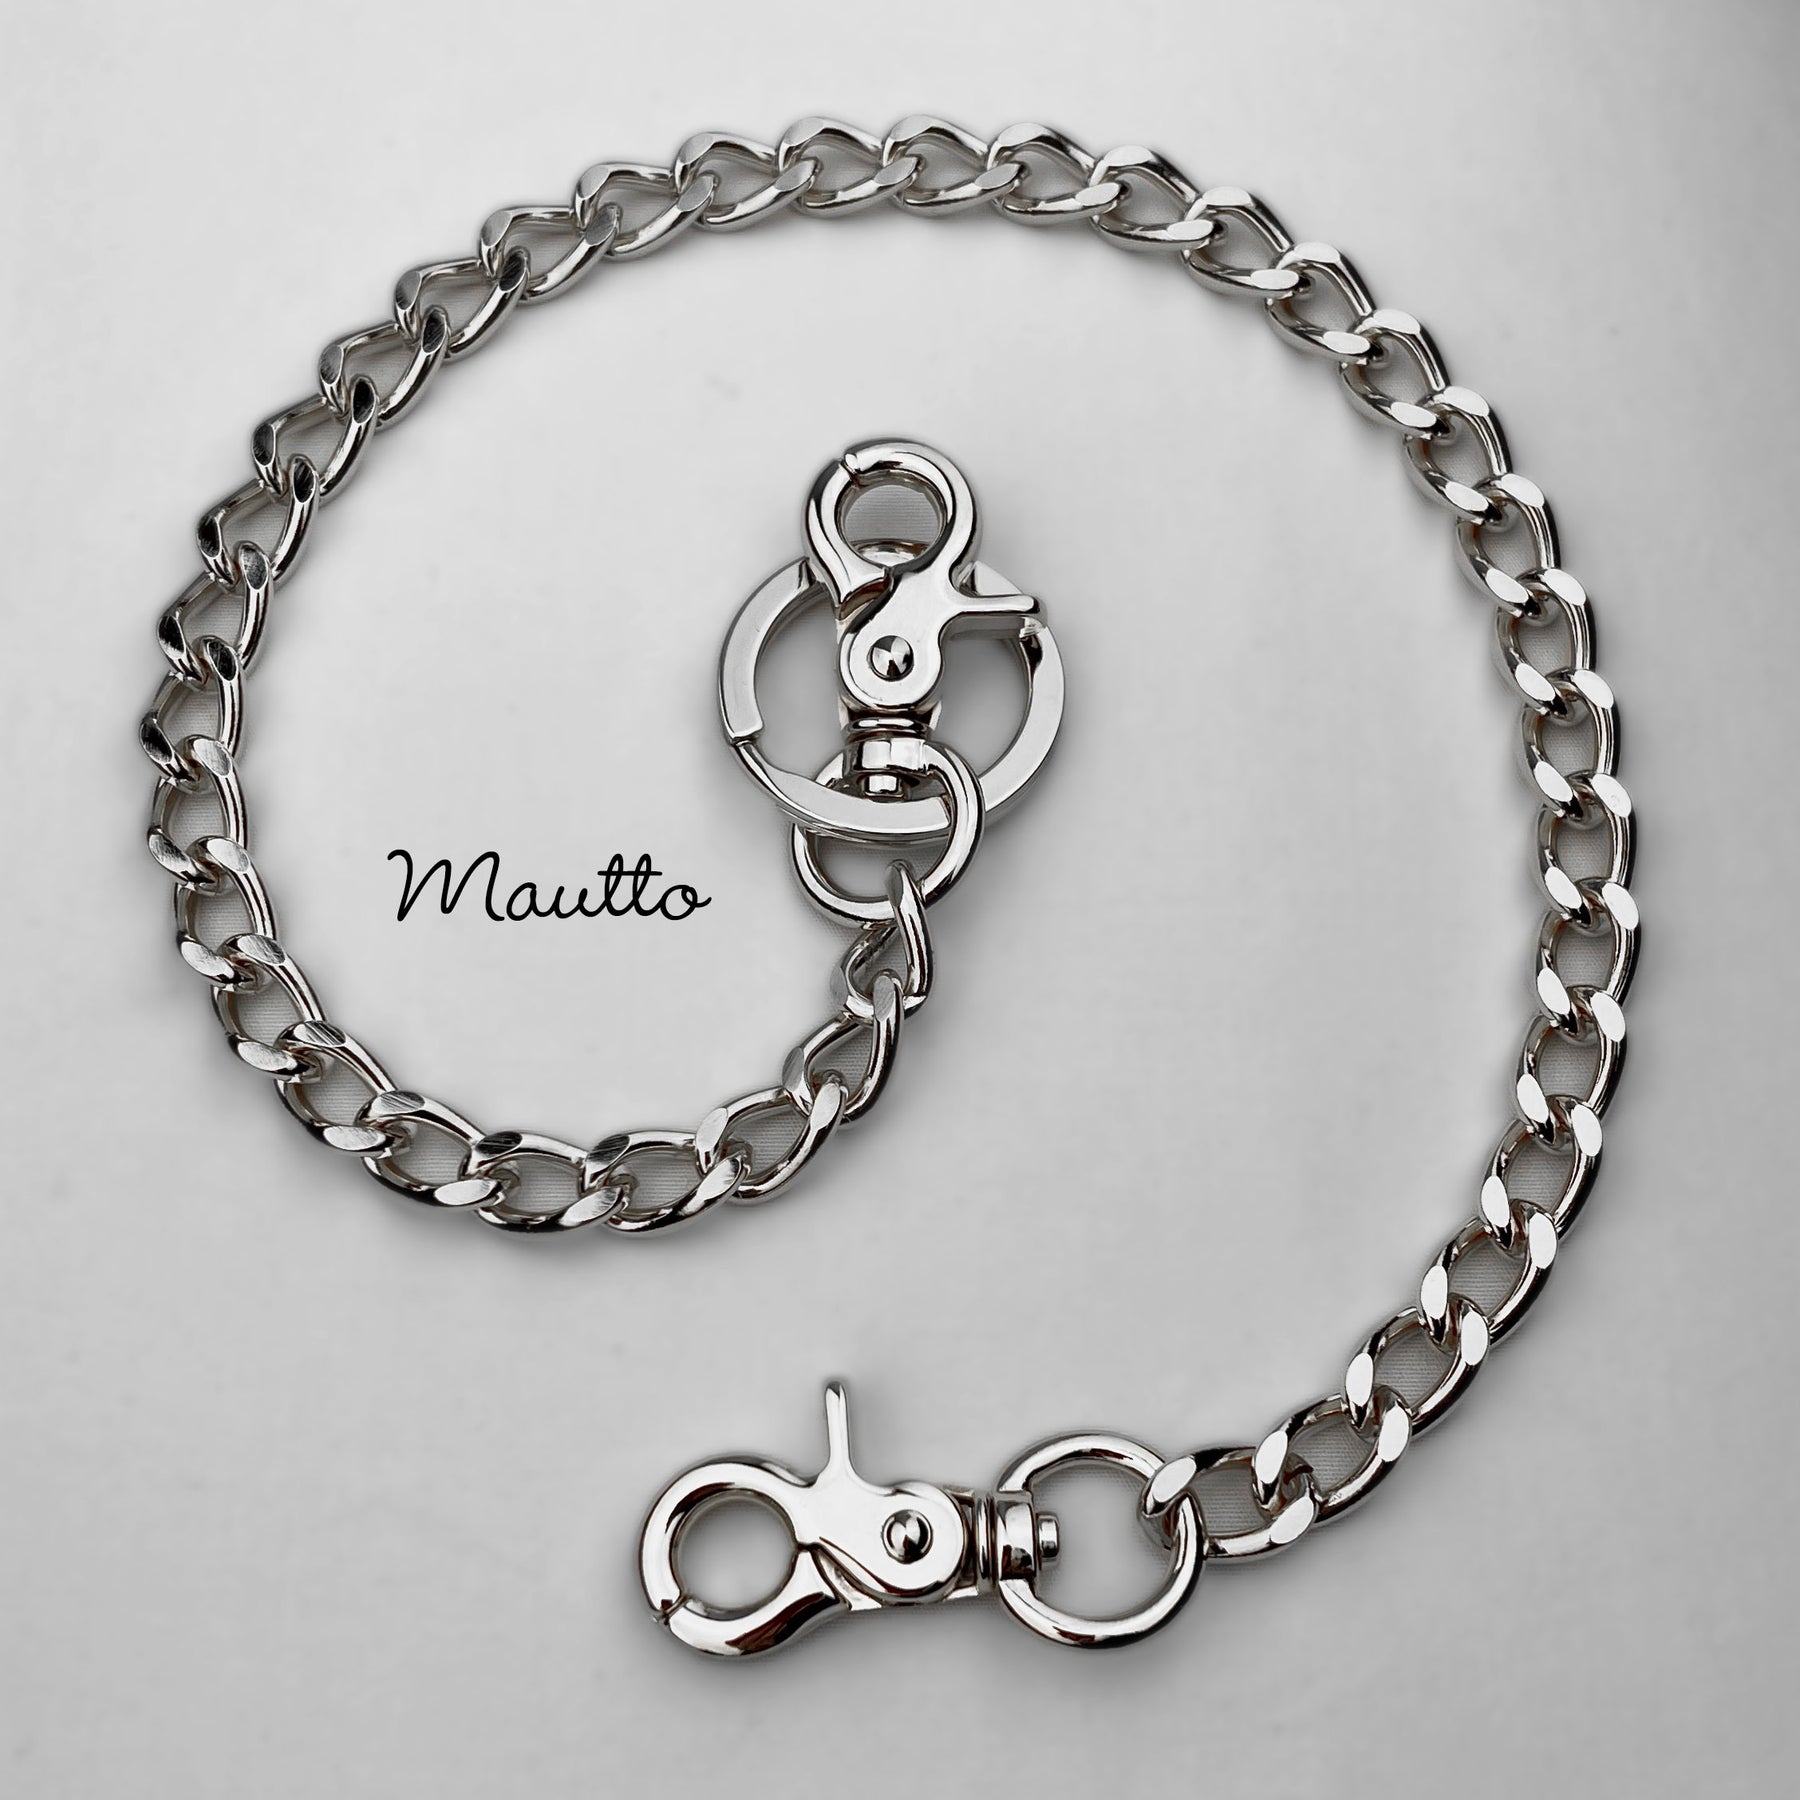 Mautto Wallet Chain / Key Tether - Standard & Long Lengths, Removable Keyring Standard - 18 Inches / Silver-Tone